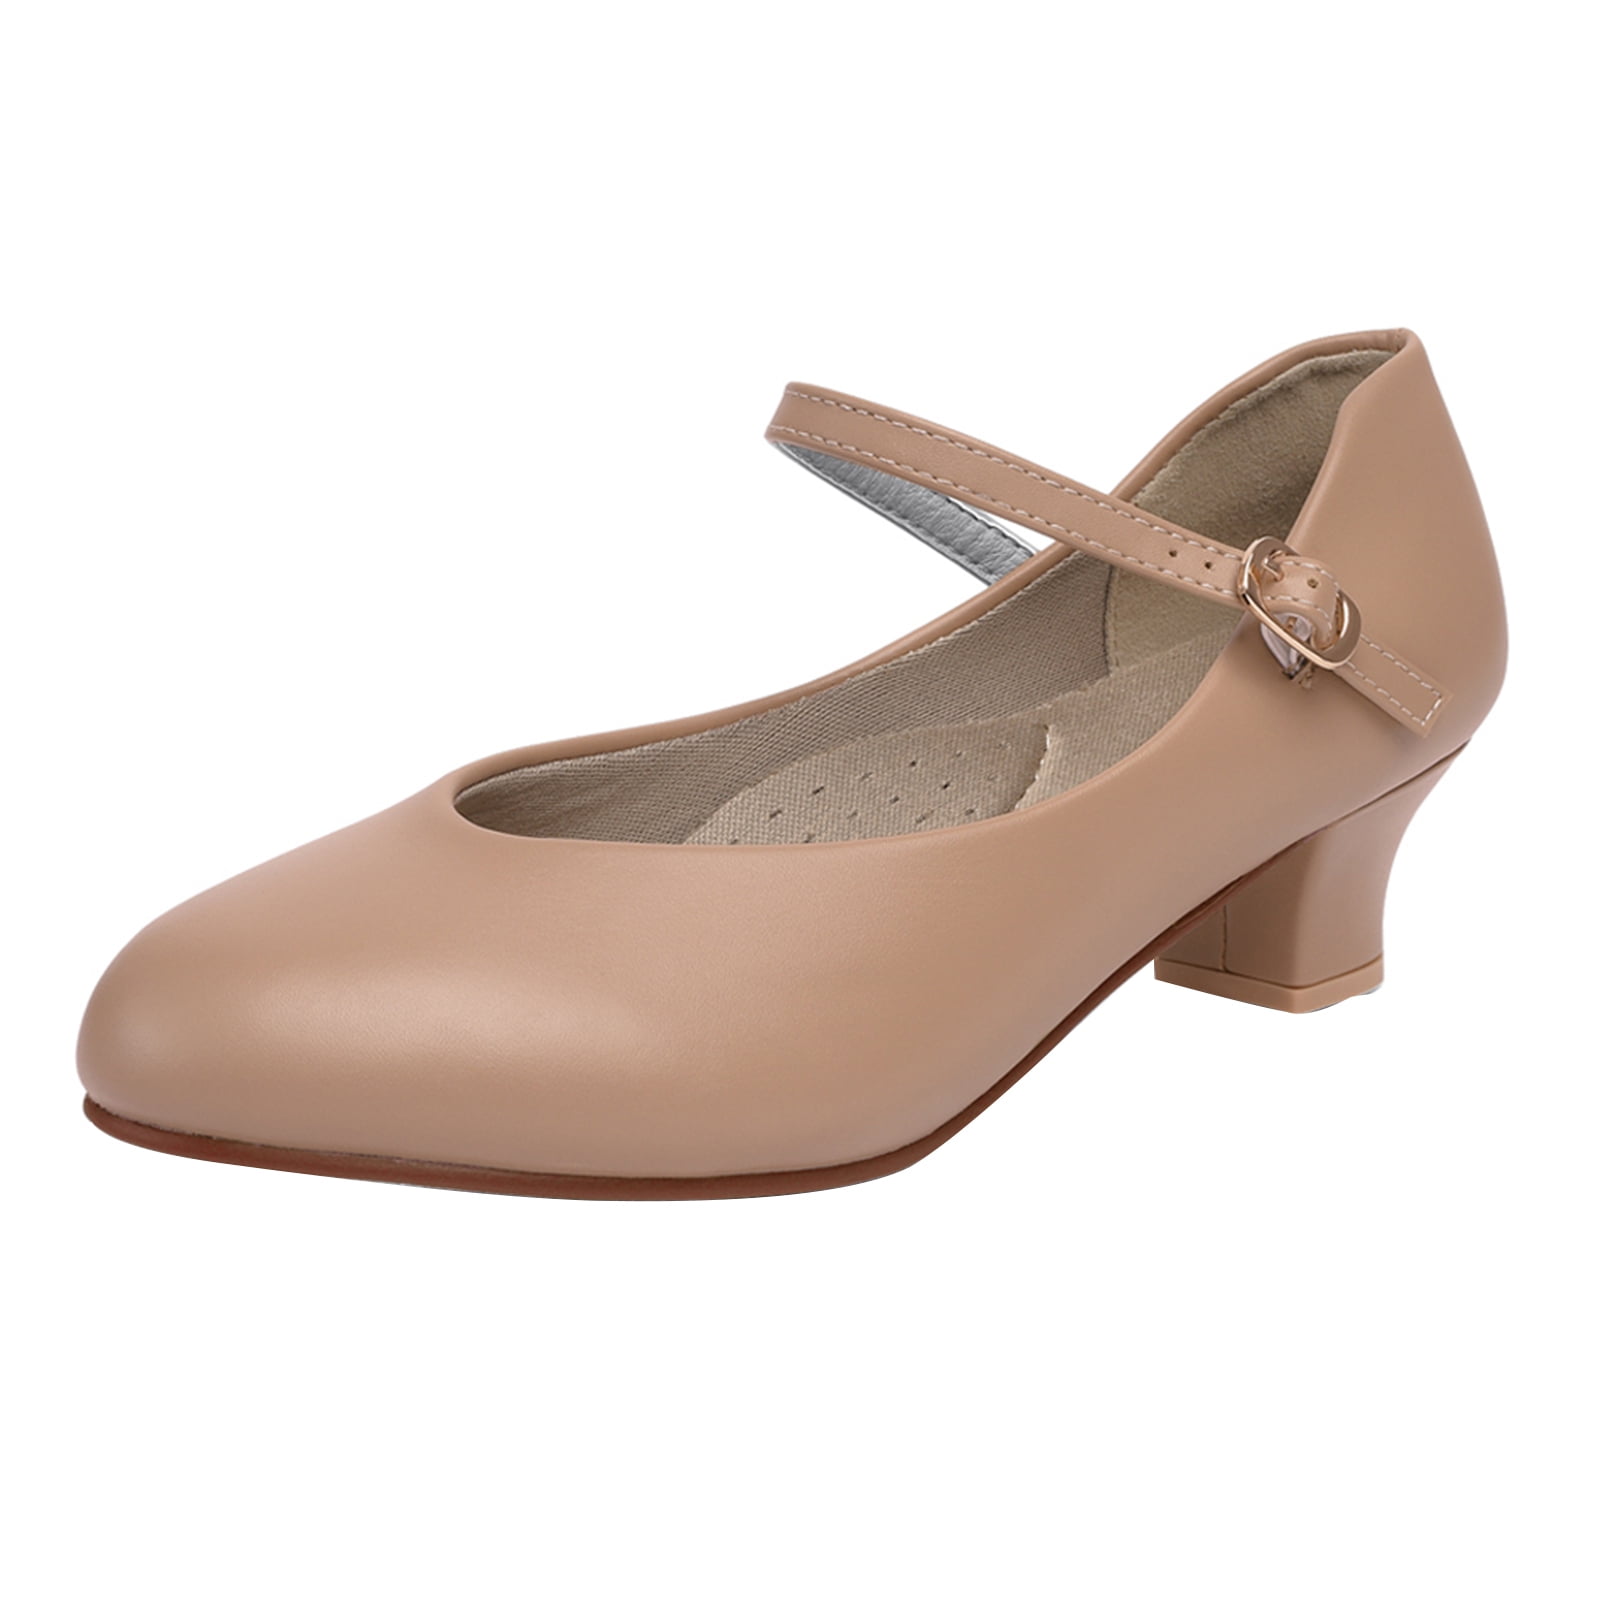 Capezio Academy character 1, women's character shoes